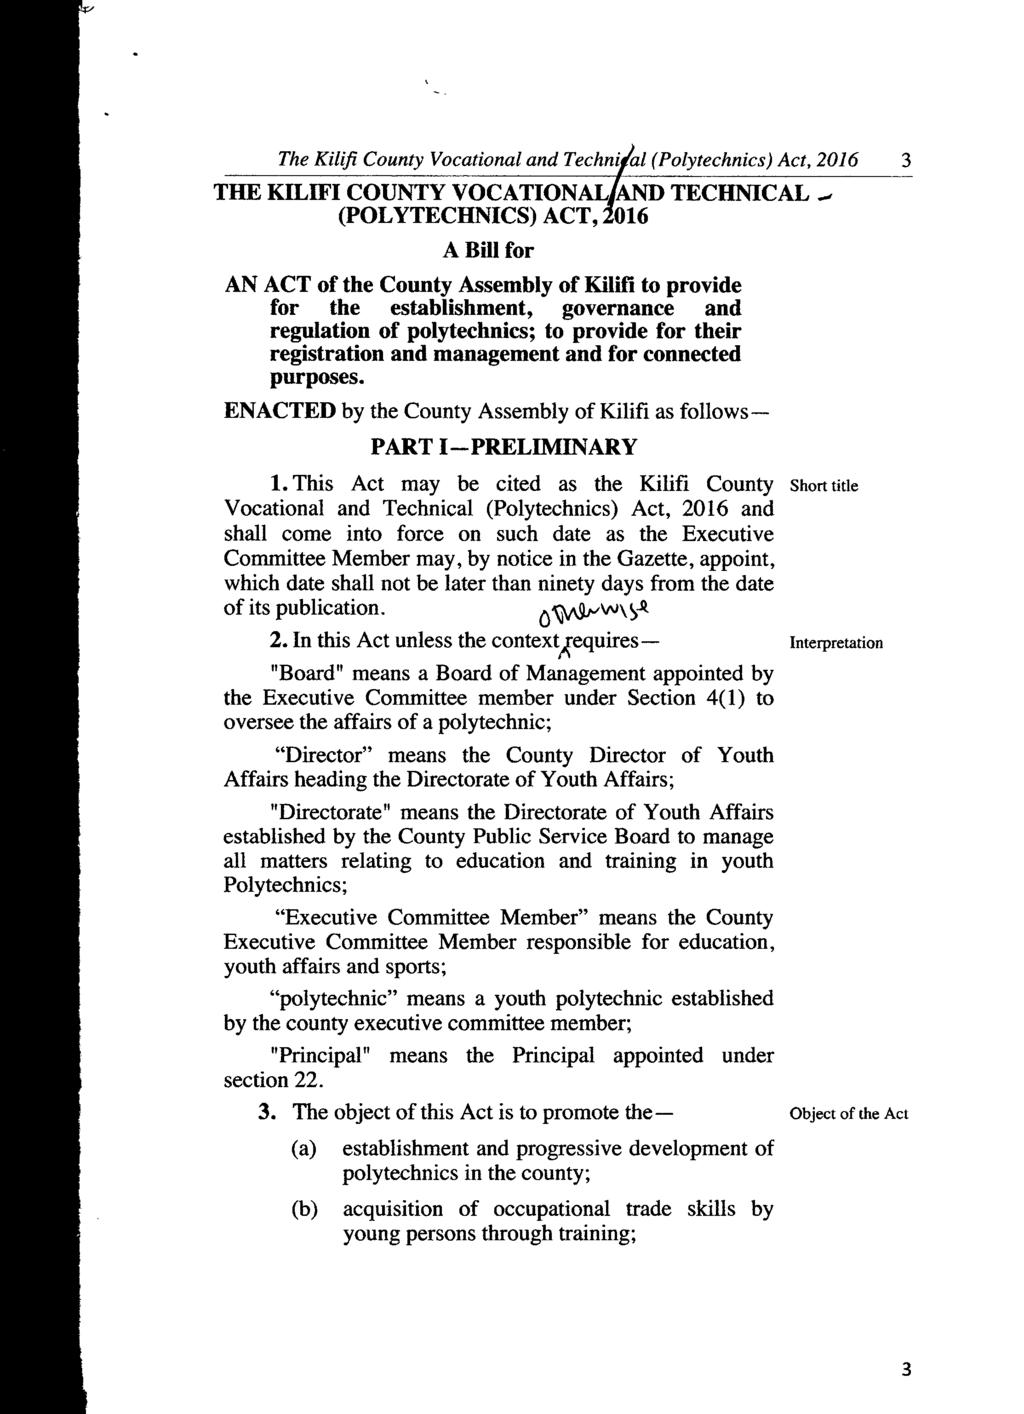 The Kilifi County Vocational and Technifal (Polytechnics) Act, 2016 3 THE KILIFI COUNTY VOCATIONA] TECHNICAL (POLYTECHNICS) ACT, 6 A Bill for AN ACT of the County Assembly of Kilifi to provide for